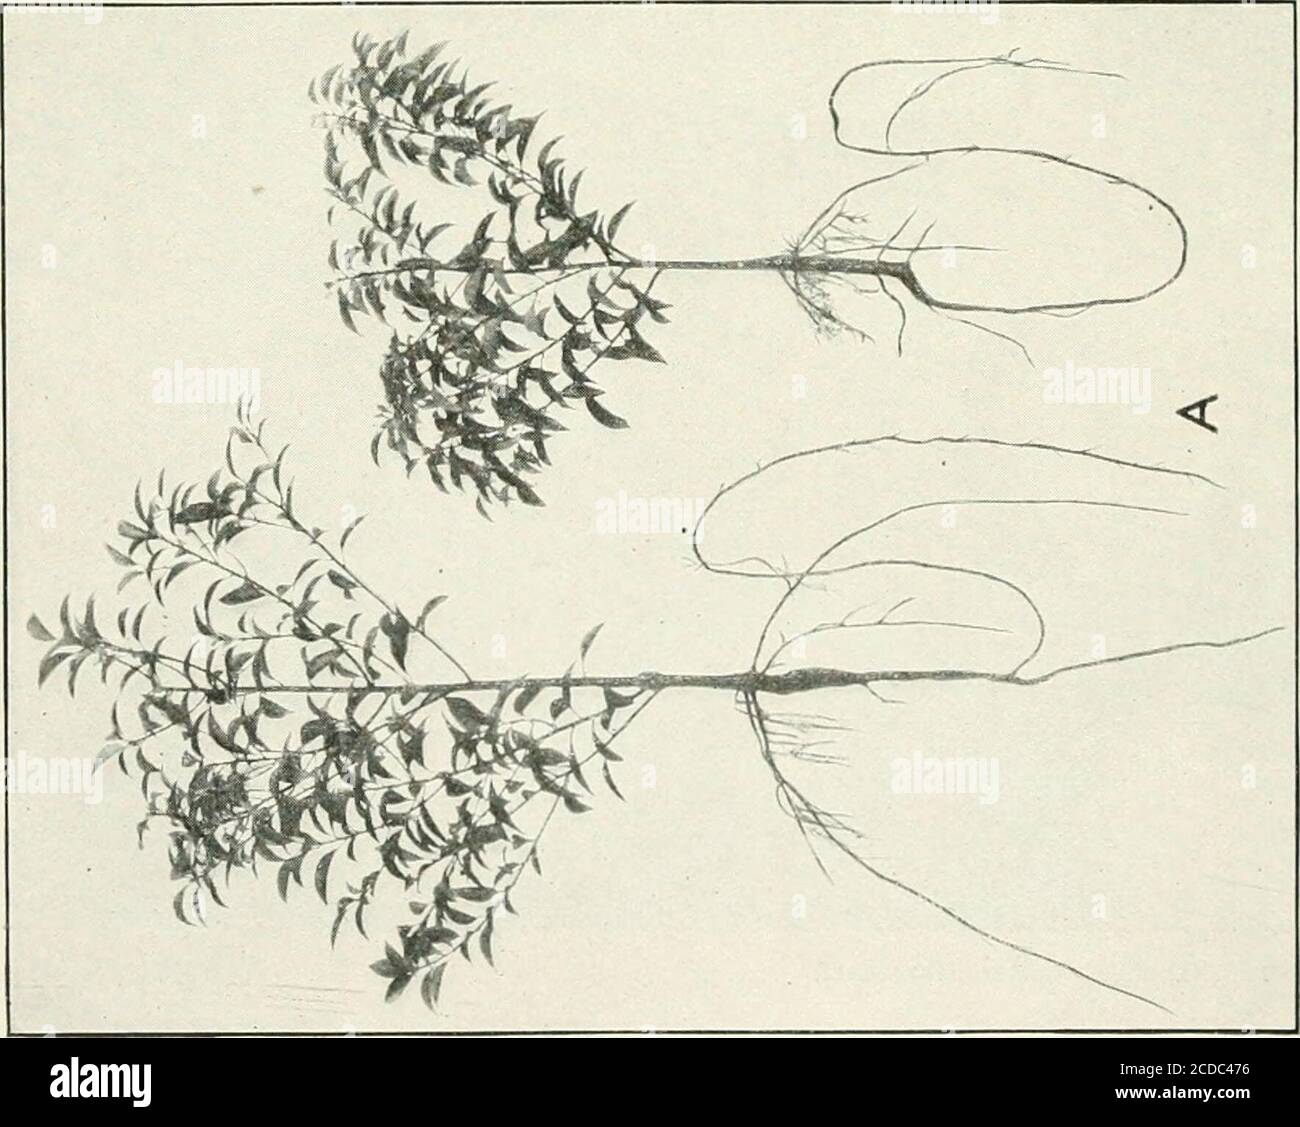 . Journal of agricultural research . Journal of Agricultural Research Vol. XVII, No. 5 PLATE 21 A.—Camphor seedlings at the time of transplanting. The tree on the left is arepresentative produced from pulped camphor seed; the one on the right is a repre-sentative produced from unpulped camphor seed. Both seedlings are from seed ofthe same parent tree and both are of the same age from planting of the seed. B.—Camphor seedlings cut back and trimmed ready for transplanting. Theseseedlings are the same as those shown in A. The one on the right is from pulped seed. BACTERIUM ABORTUS INFECTION OF BU Stock Photo